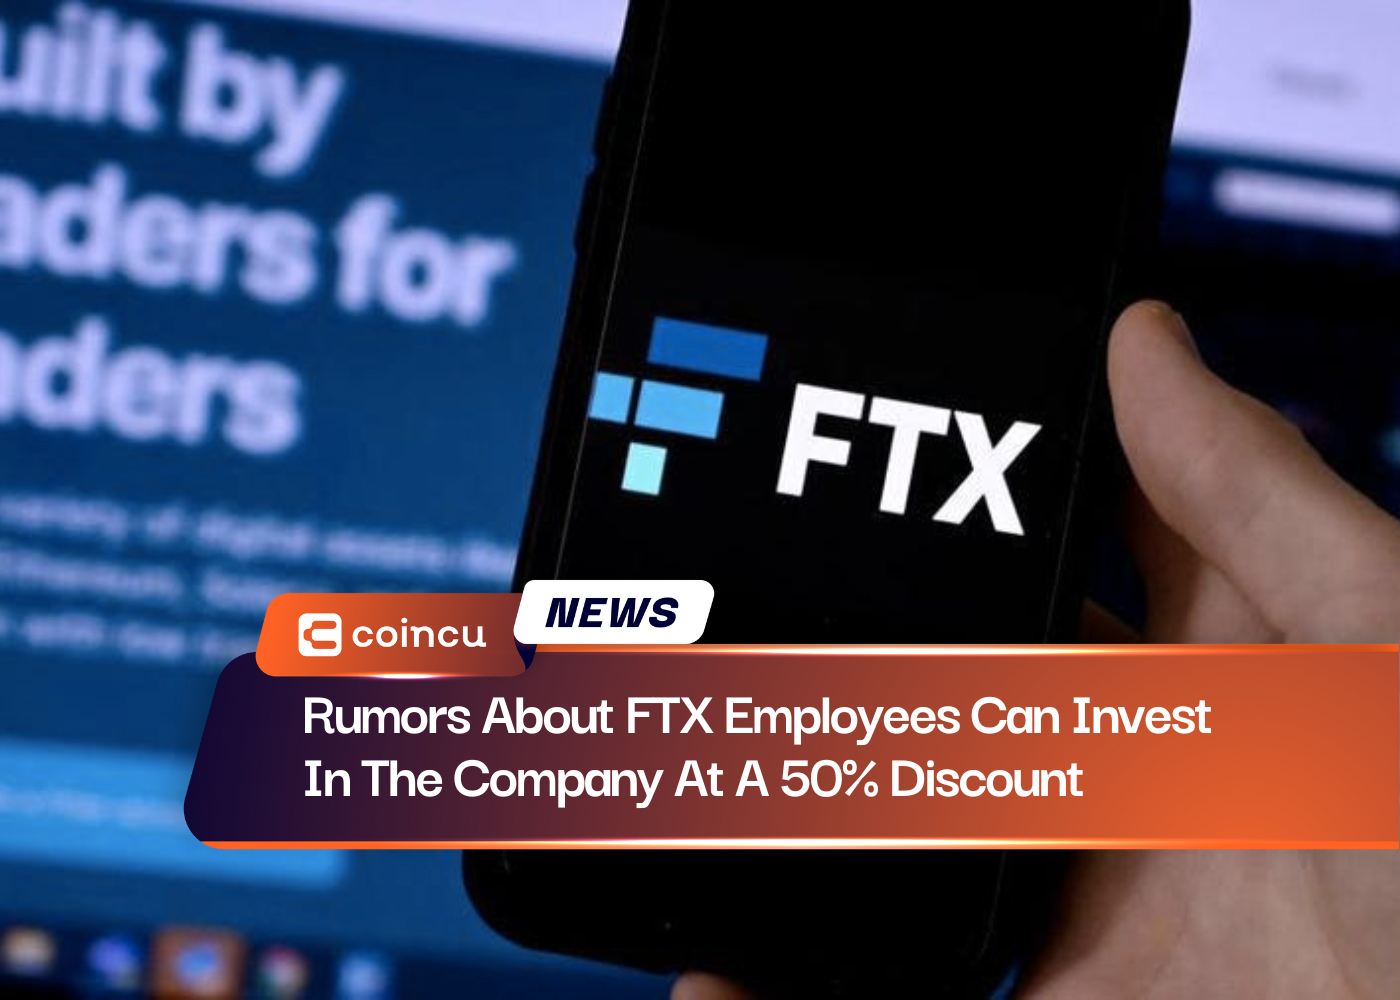 Rumors About FTX Employees Can Invest In The Company At A 50% Discount